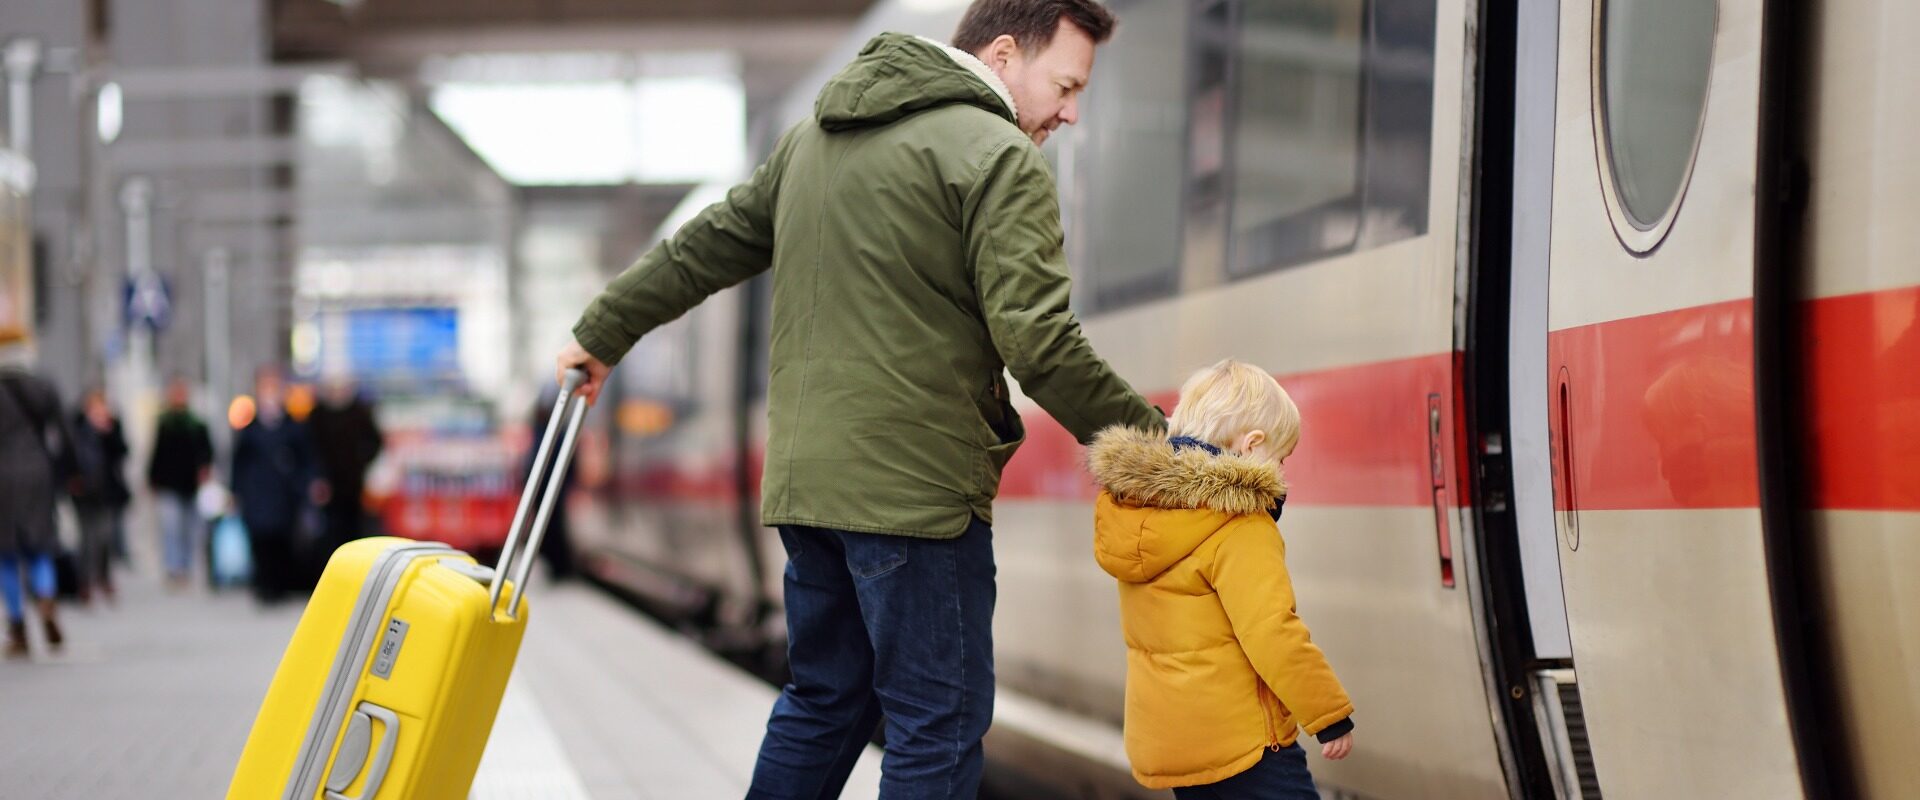 Father and young son boarding train